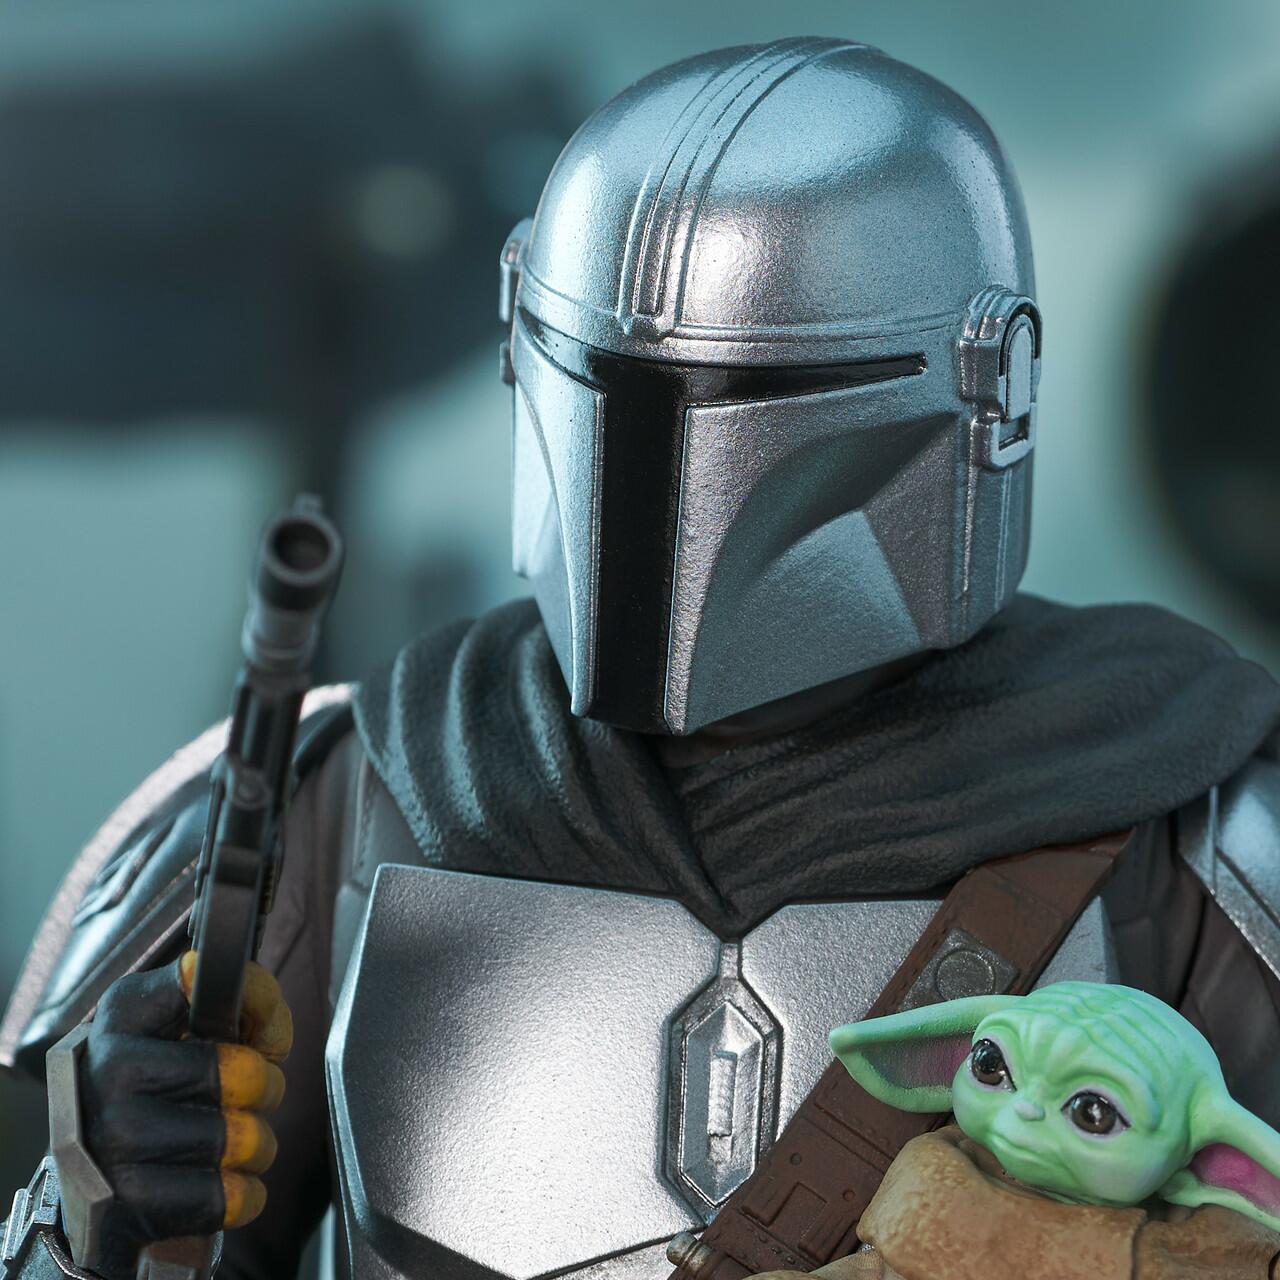 The Mandalorian™ with Grogu™ Mini Bust - St Patrick's Day Exclusive © 2023 Gentle Giant Ltd.